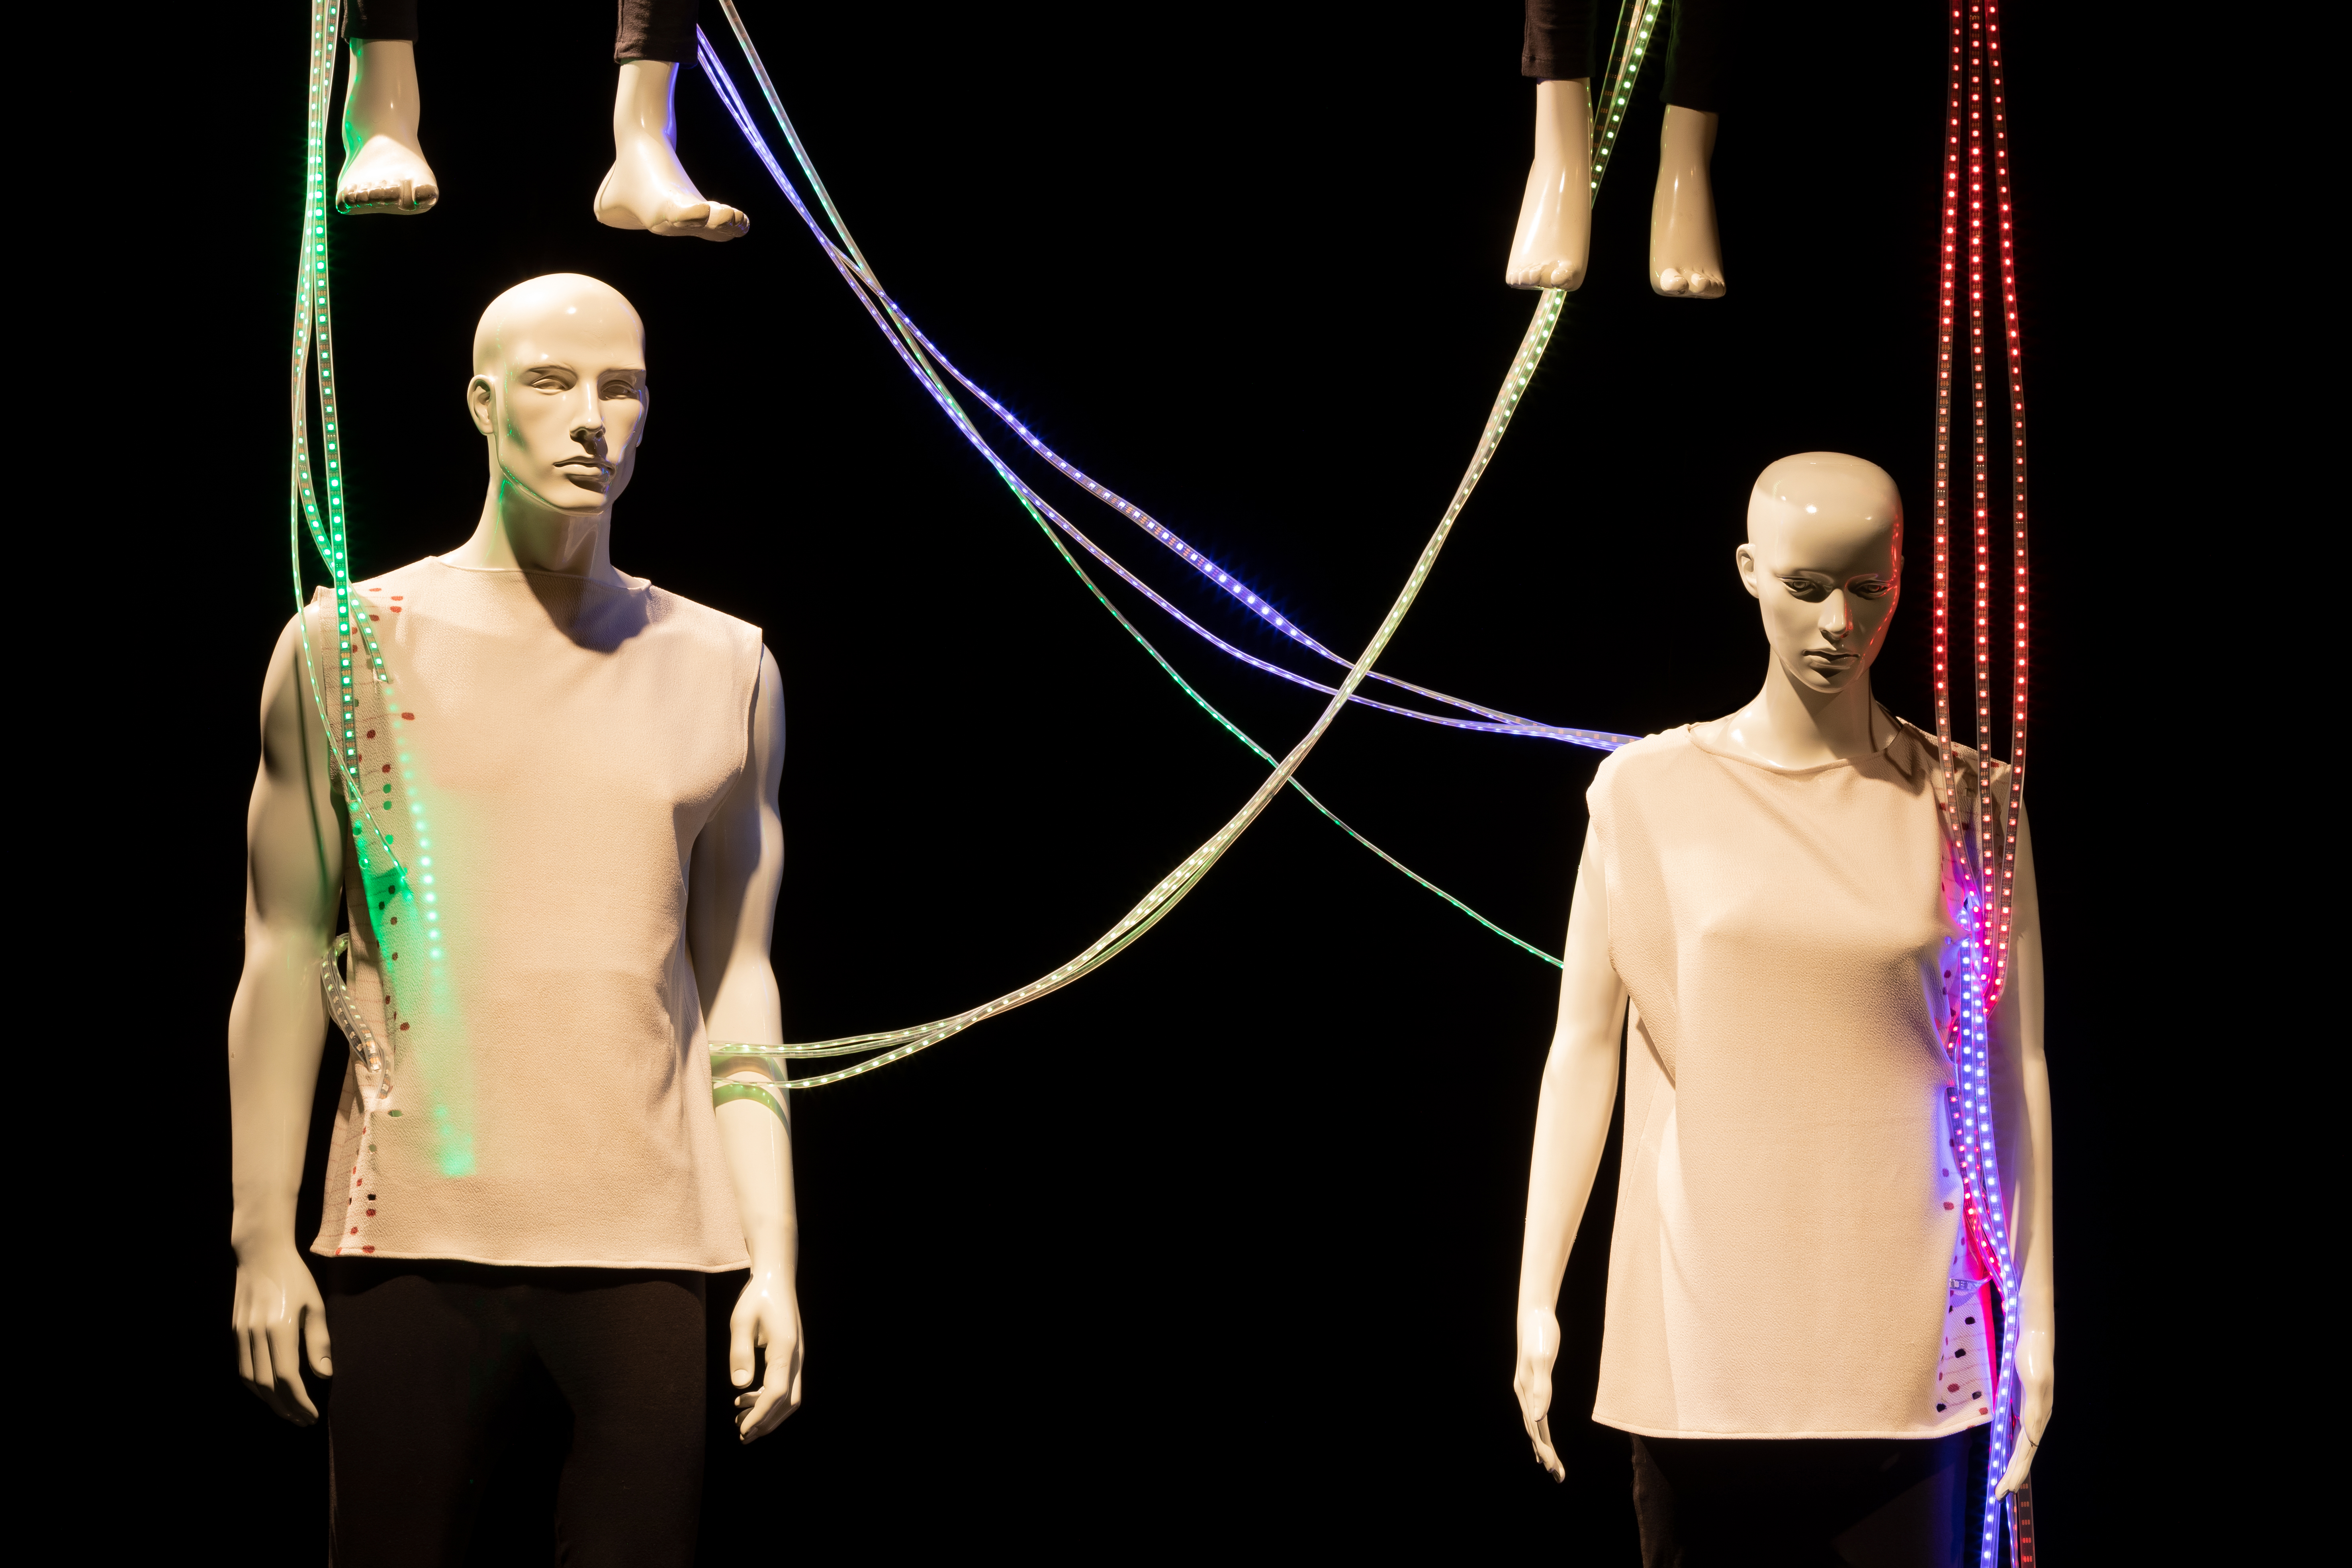 Final major project by an MA student - show mannequins draped in string lights 